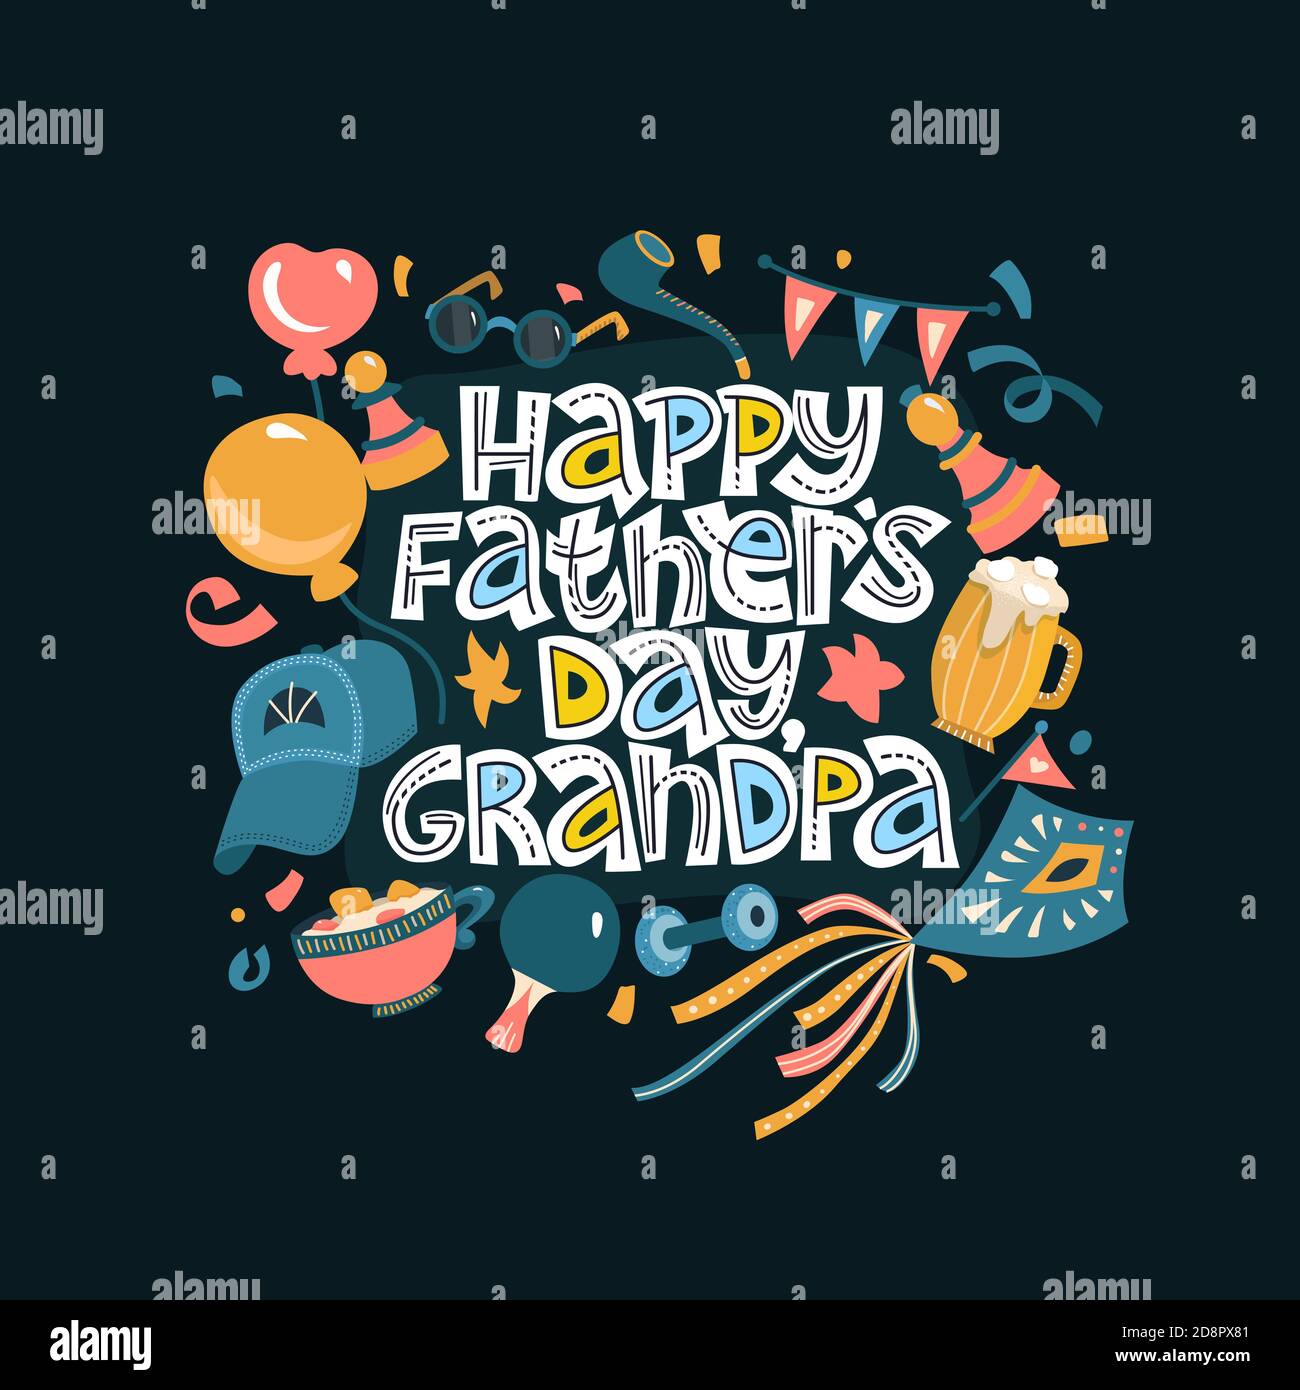 Download Happy Father S Day Grandpa Lettering Complimentary Quote On The Dark Background Typography Phrase For A Gift Card Banner Badge Poster Print Stock Vector Image Art Alamy